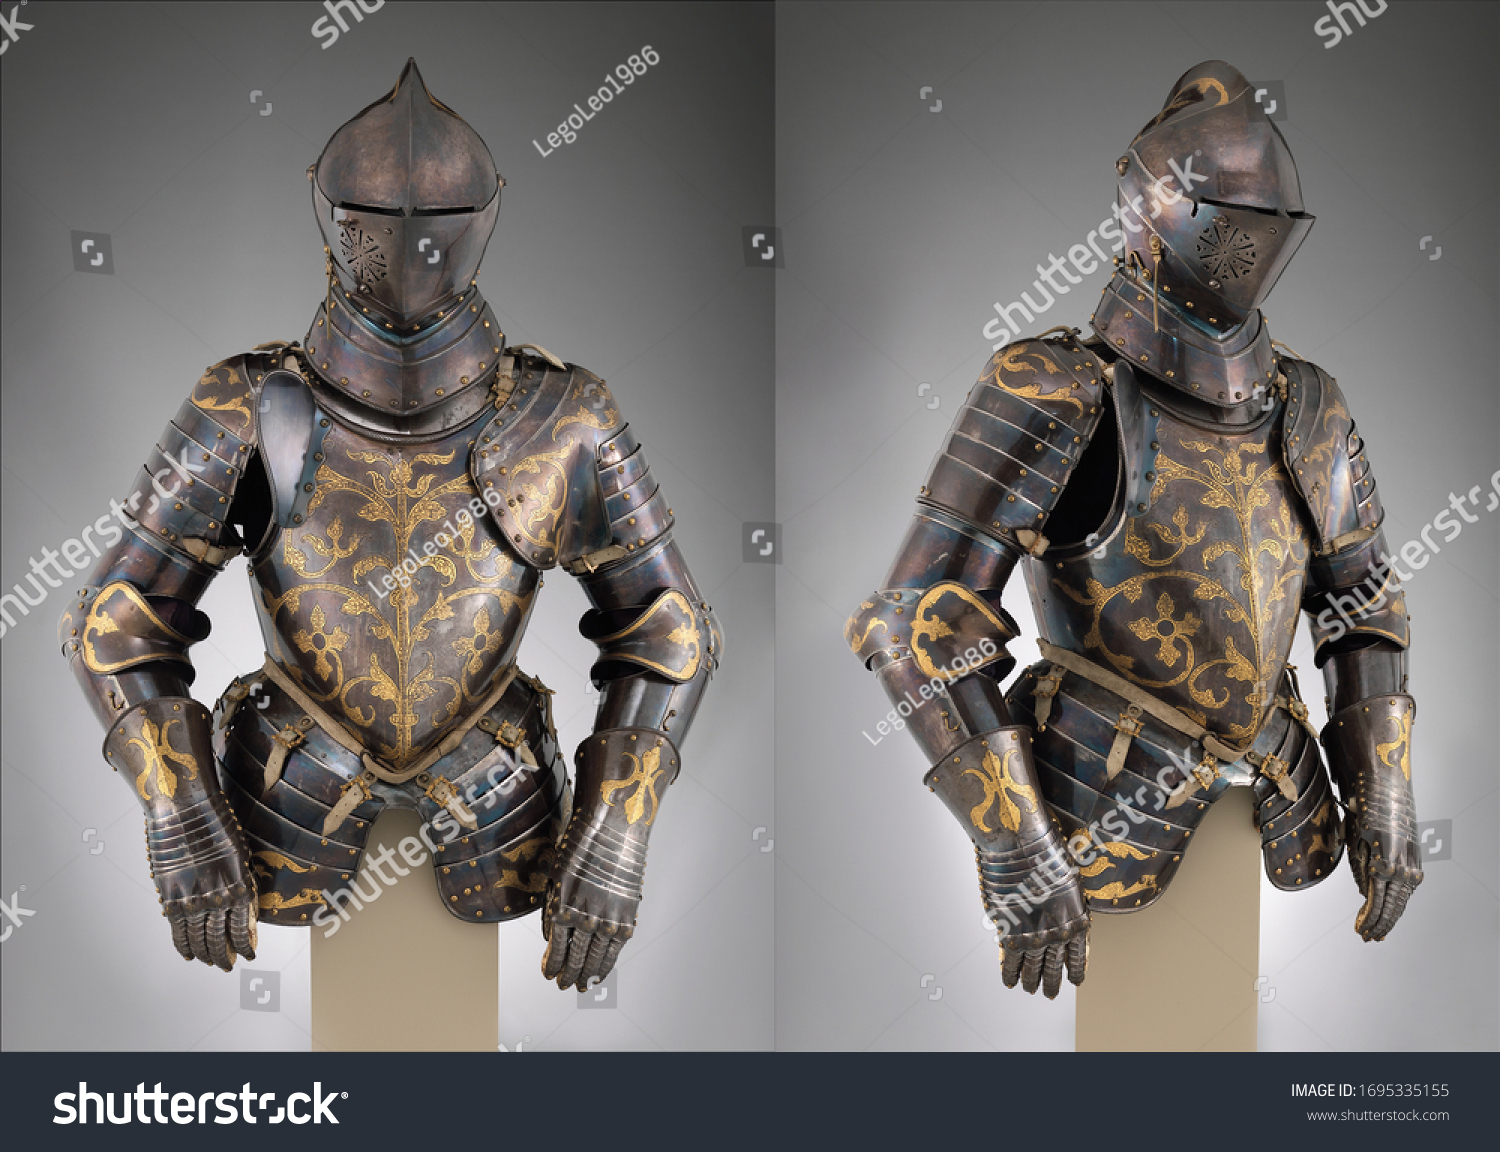 Armor from different angles views, Medieval knight Armor #1695335155